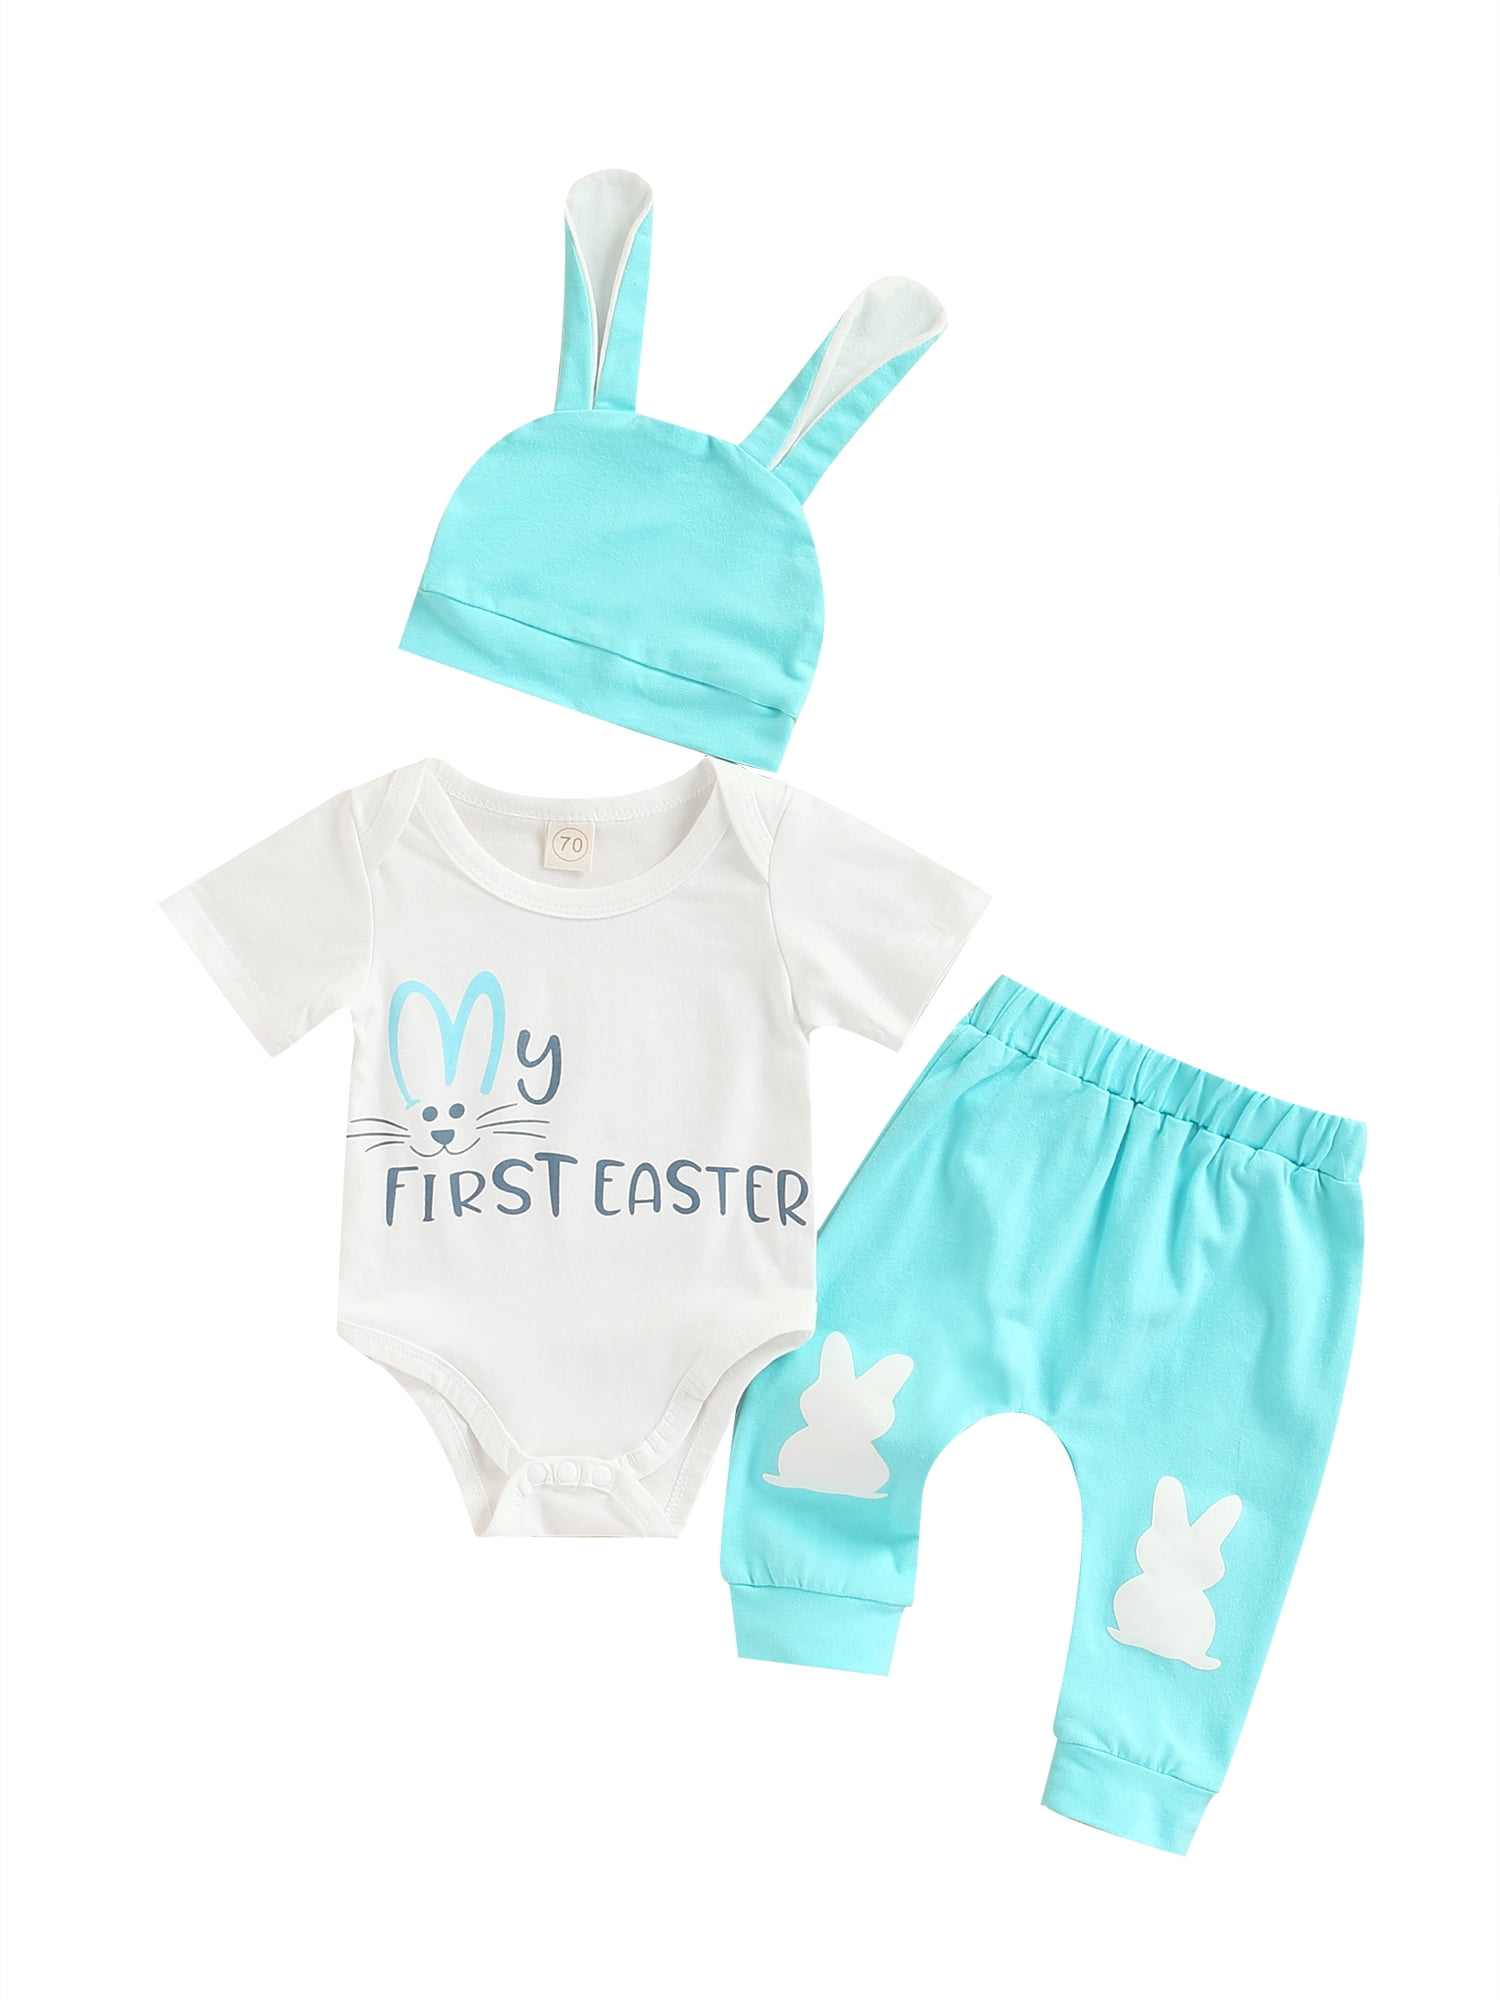 Toddler Baby Boys Easter Sets Infant Bunny Printed Newborn Outfit Spring Fall Winter 0-24M